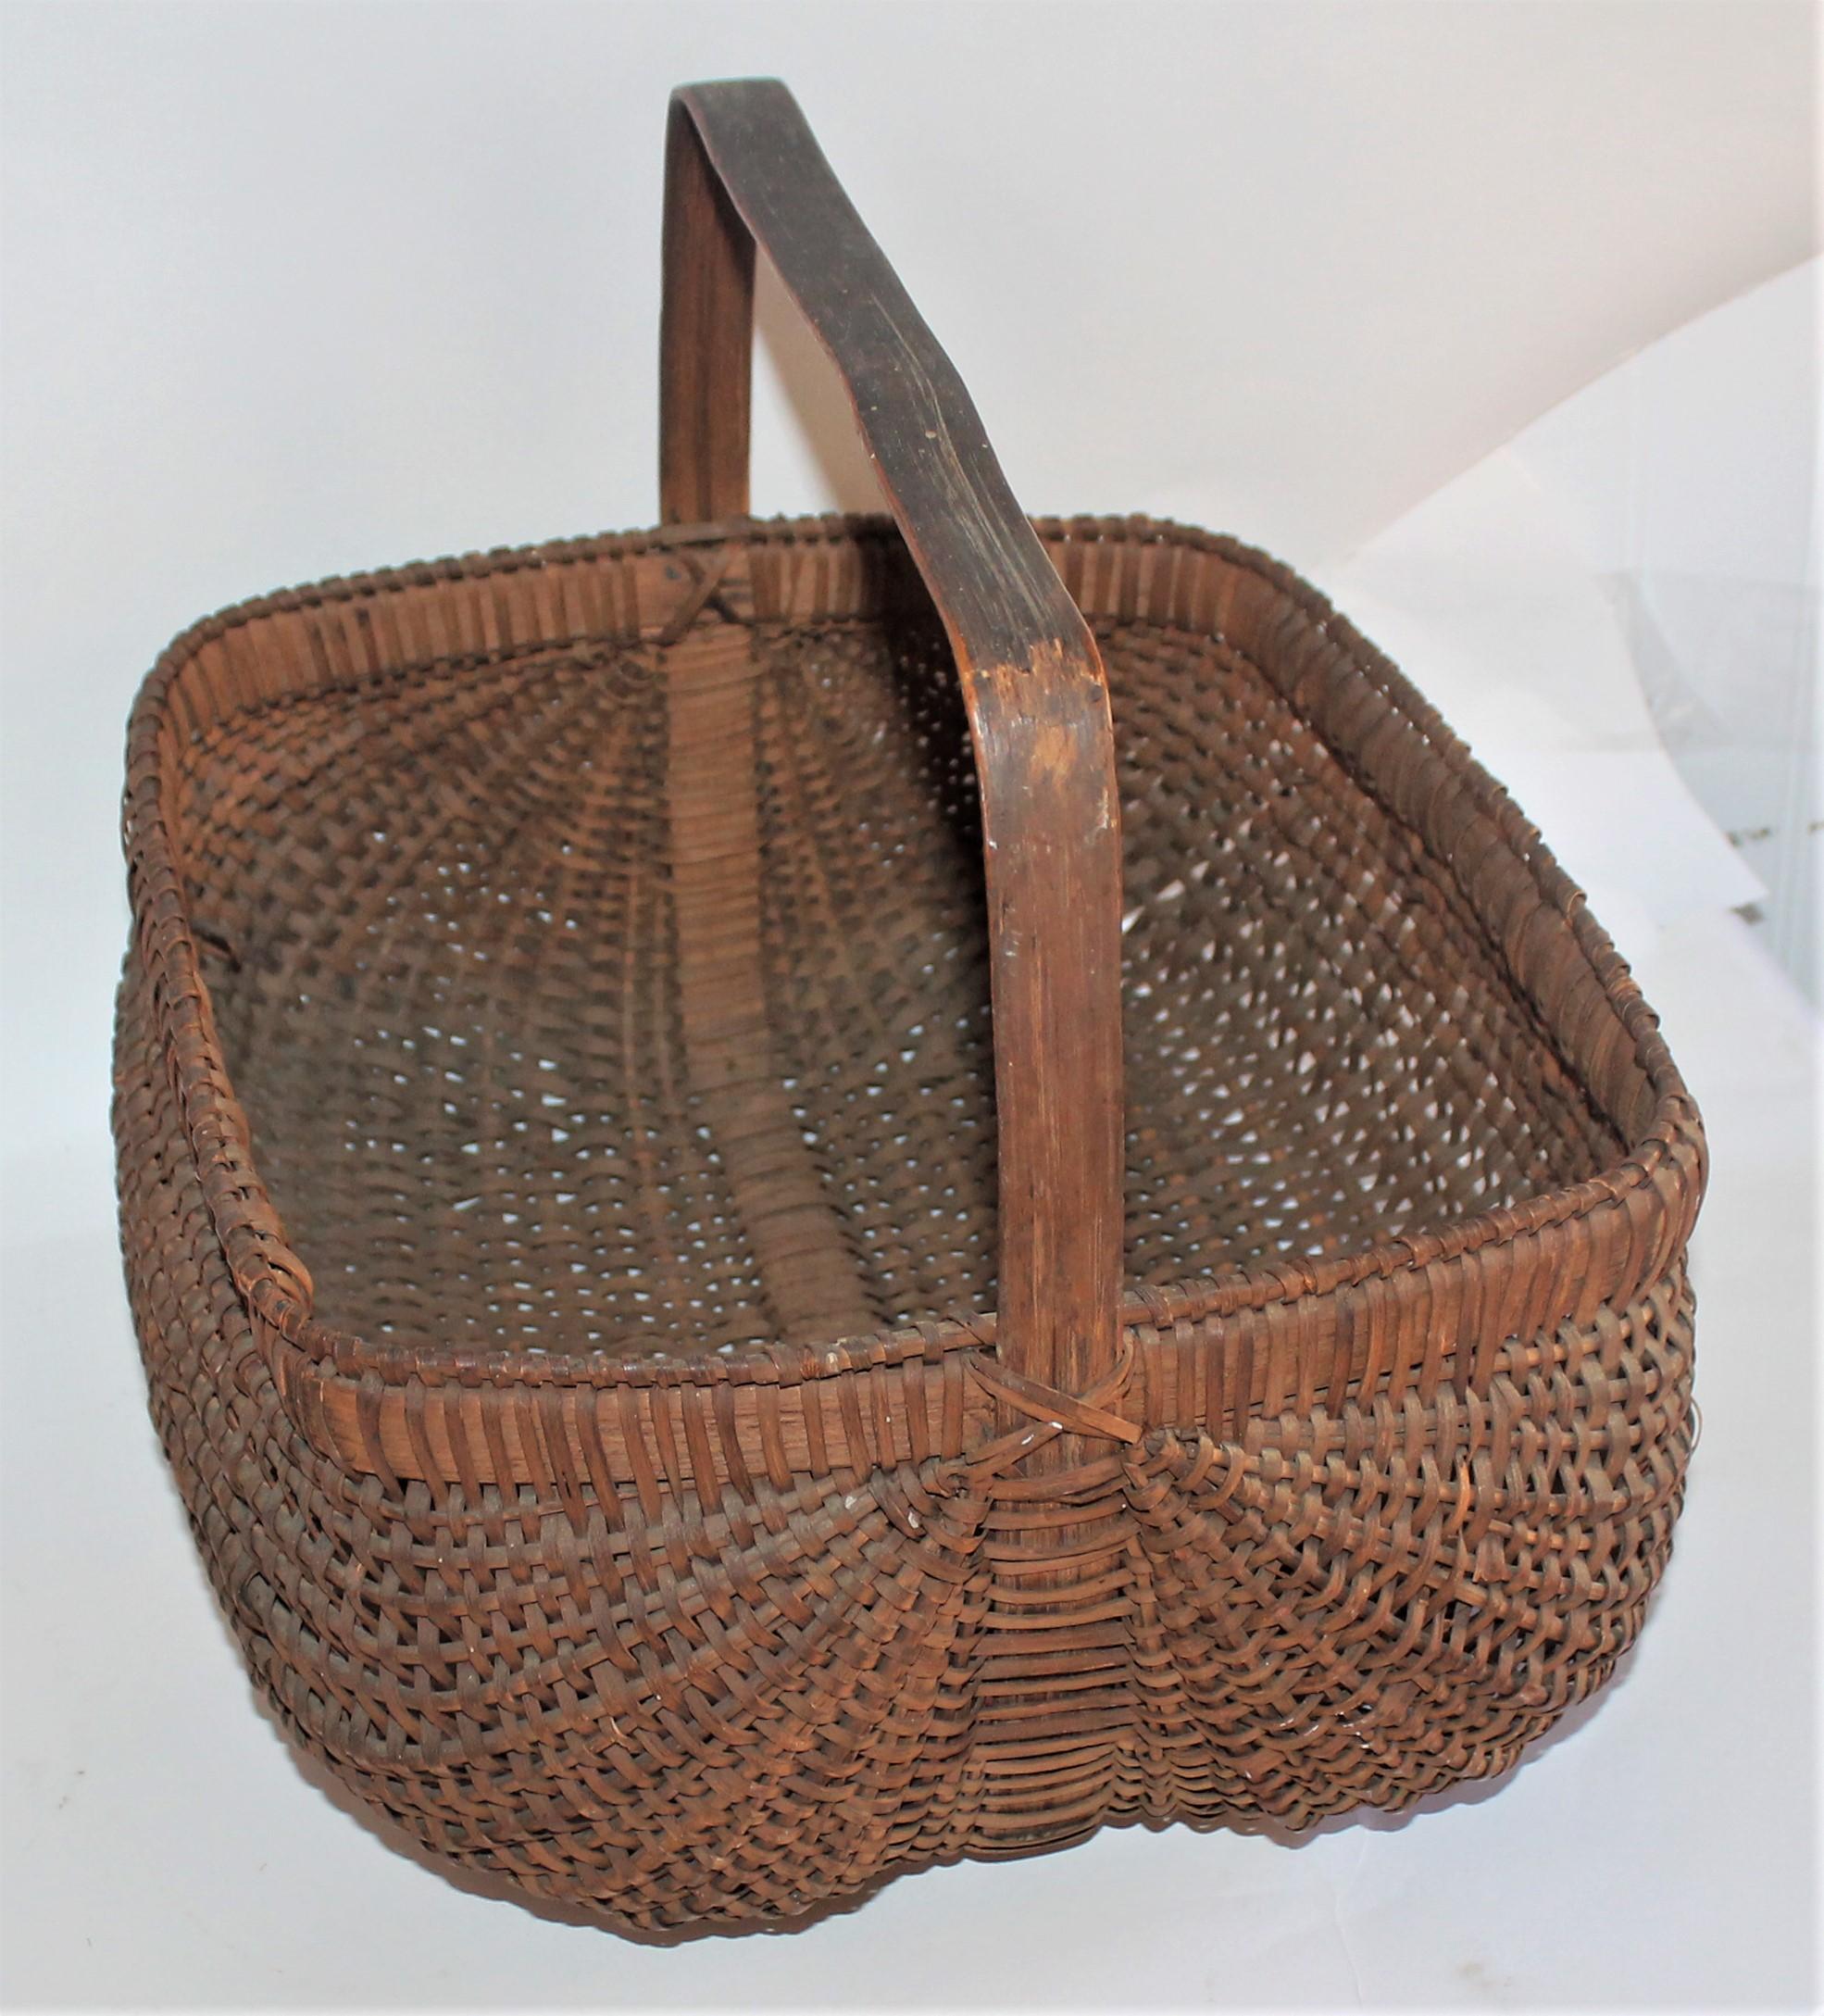 19th century early tightly woven basket with original handle. The condition is very good.